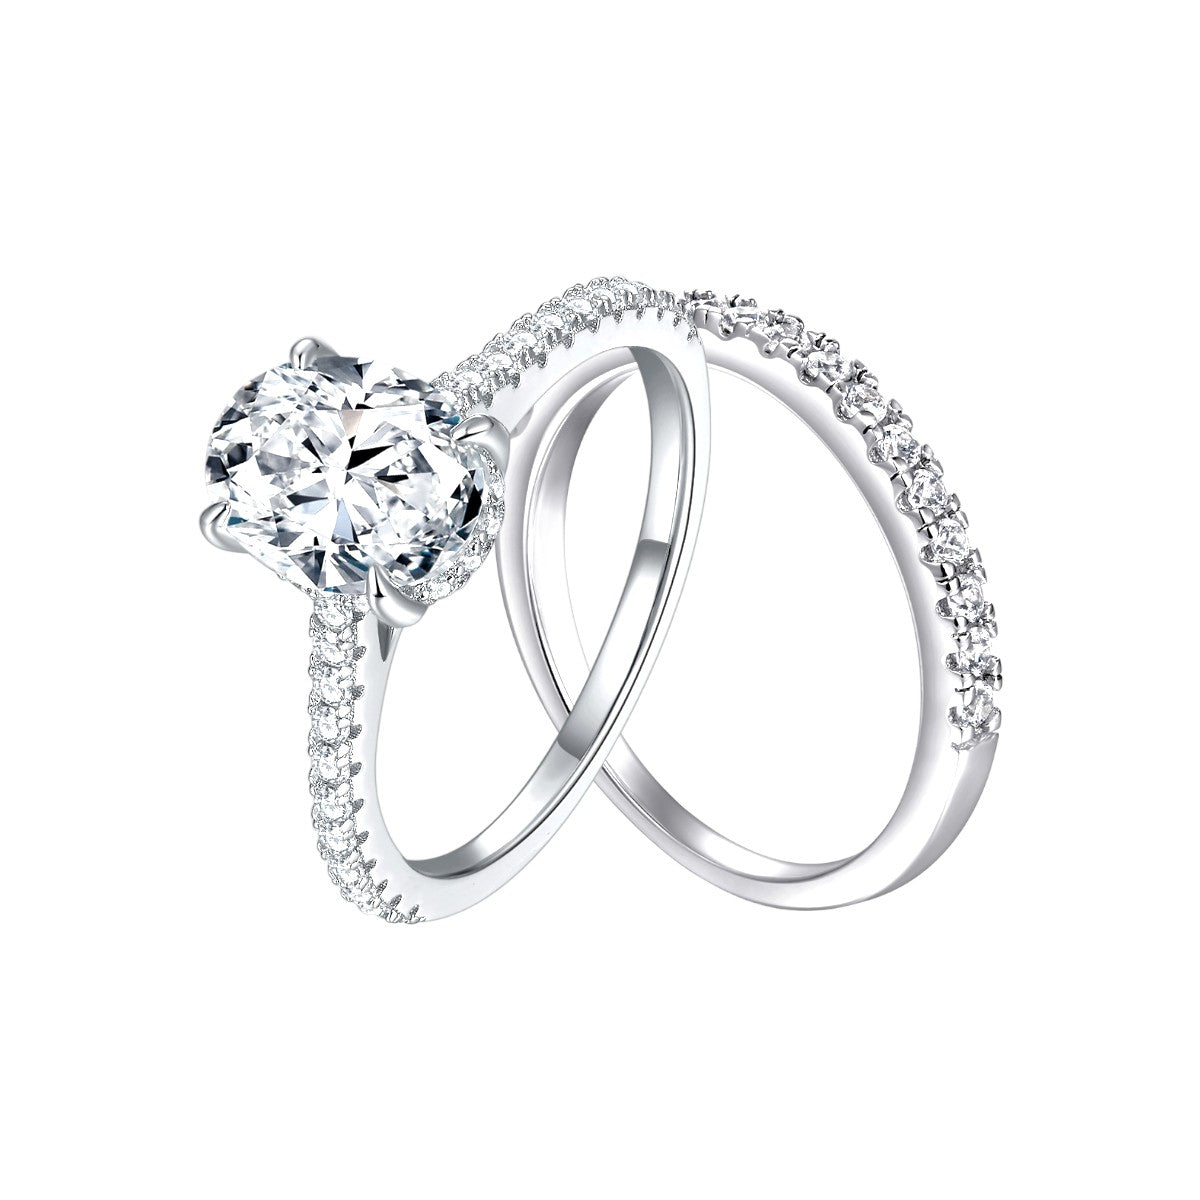 2.25Ct Classic Oval Cut Solitaire Wedding Ring Set